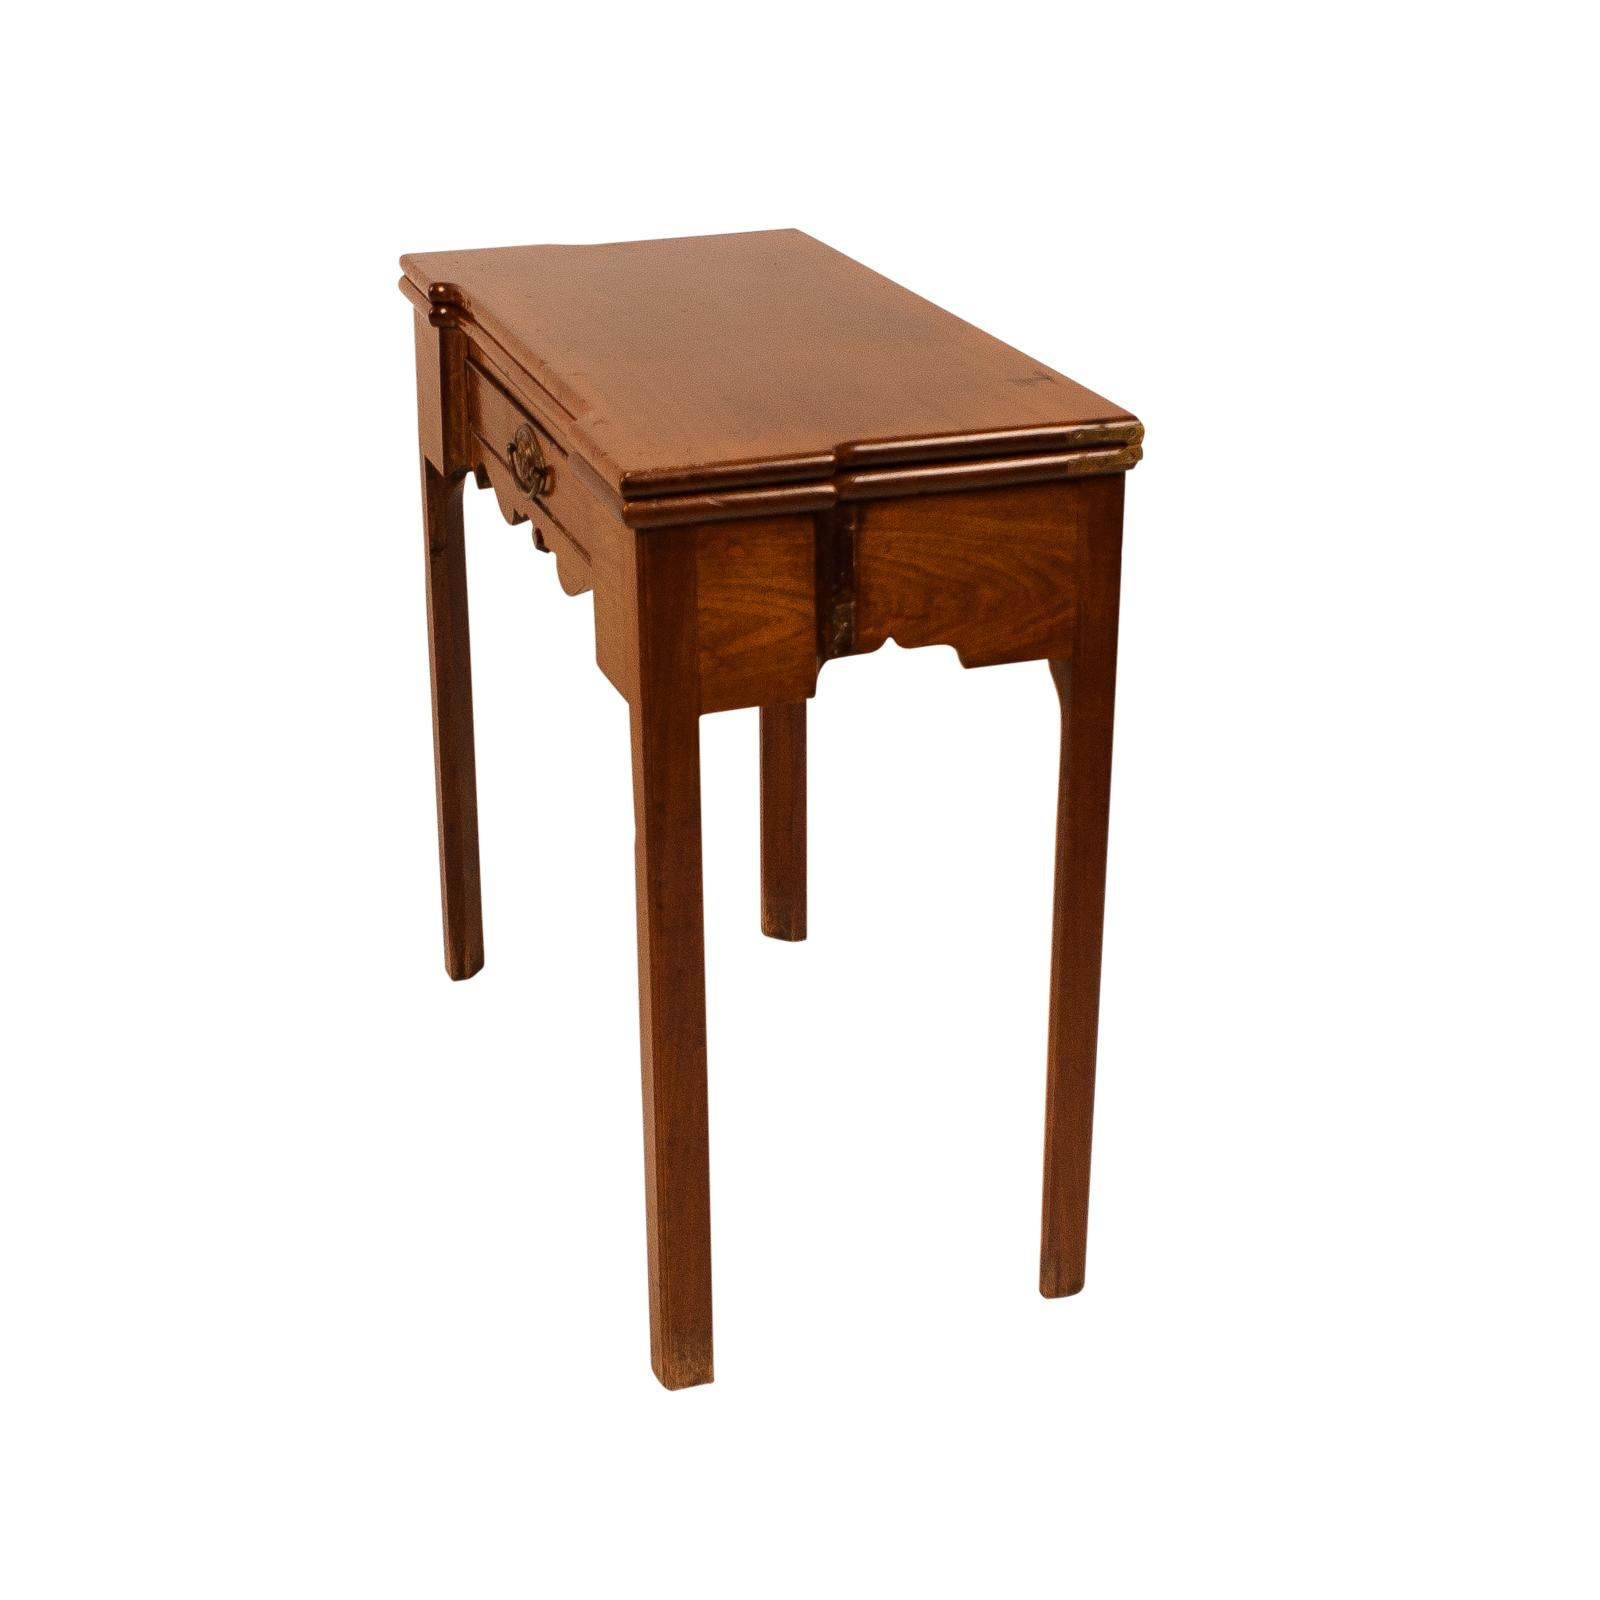 A mid-18th Century English George II period small game table, crica 1750. When opened table measures 30.25